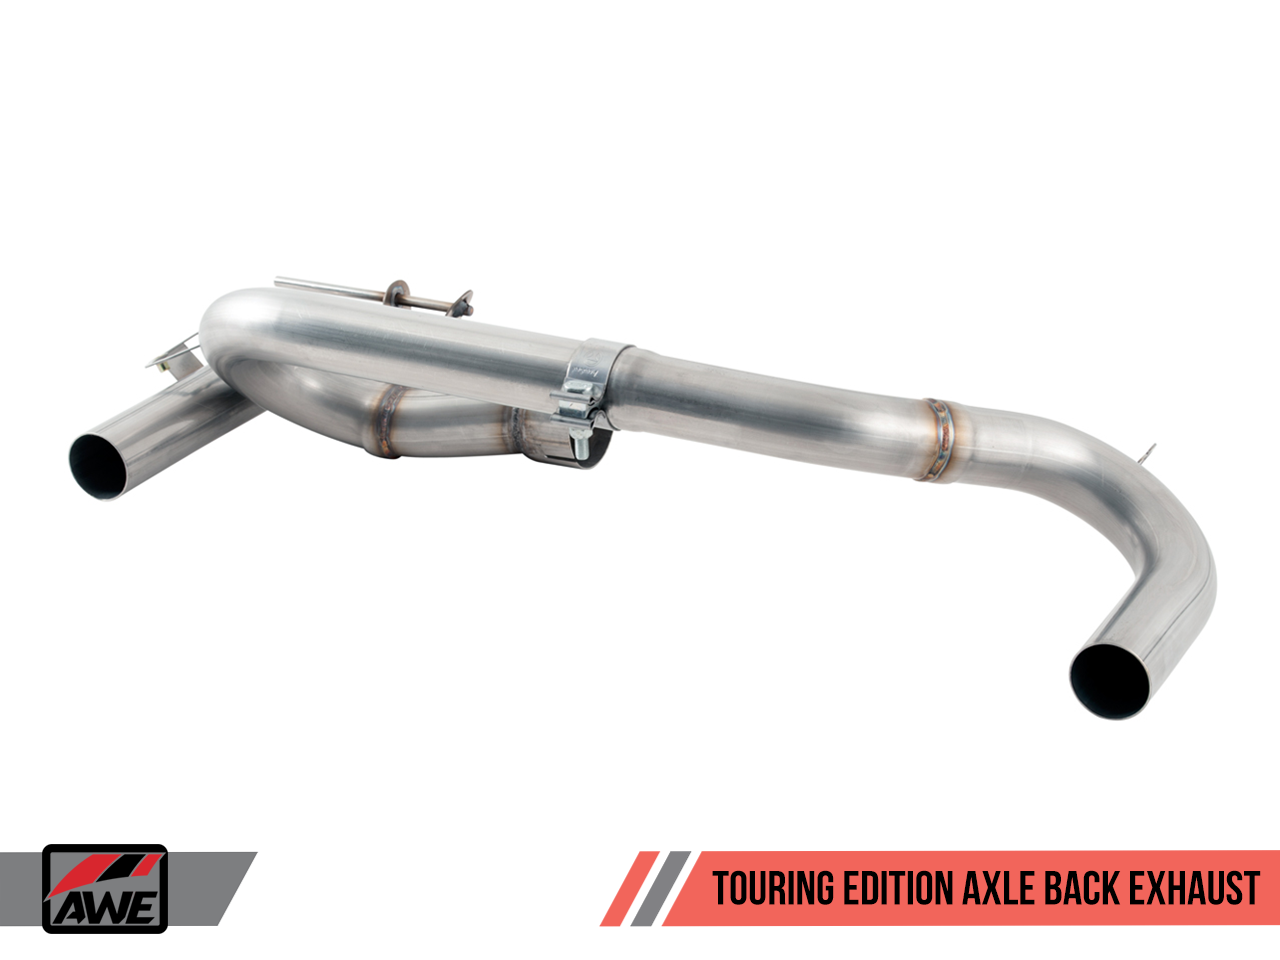 AWE Touring Edition Axle Back Exhaust for BMW F3X 335i/435i - Chrome Silver Tips (90mm)